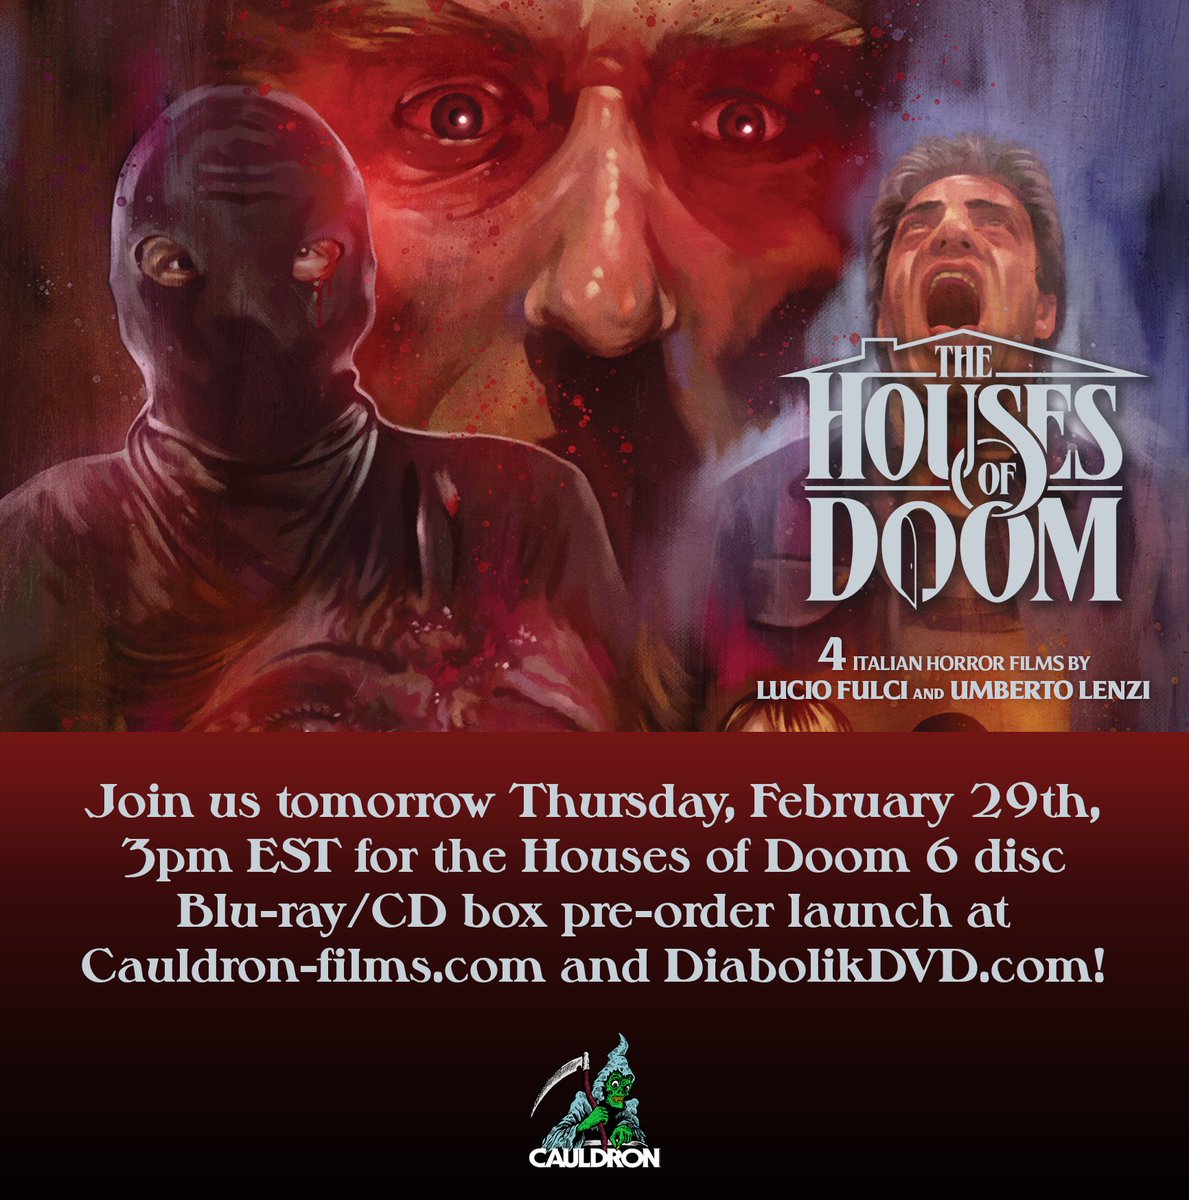 The Houses of Doom pre-order starts tomorrow, Thursday February 29th 3pm EST at Cauldron-films.com and DiabolikDVD.com! See you there!